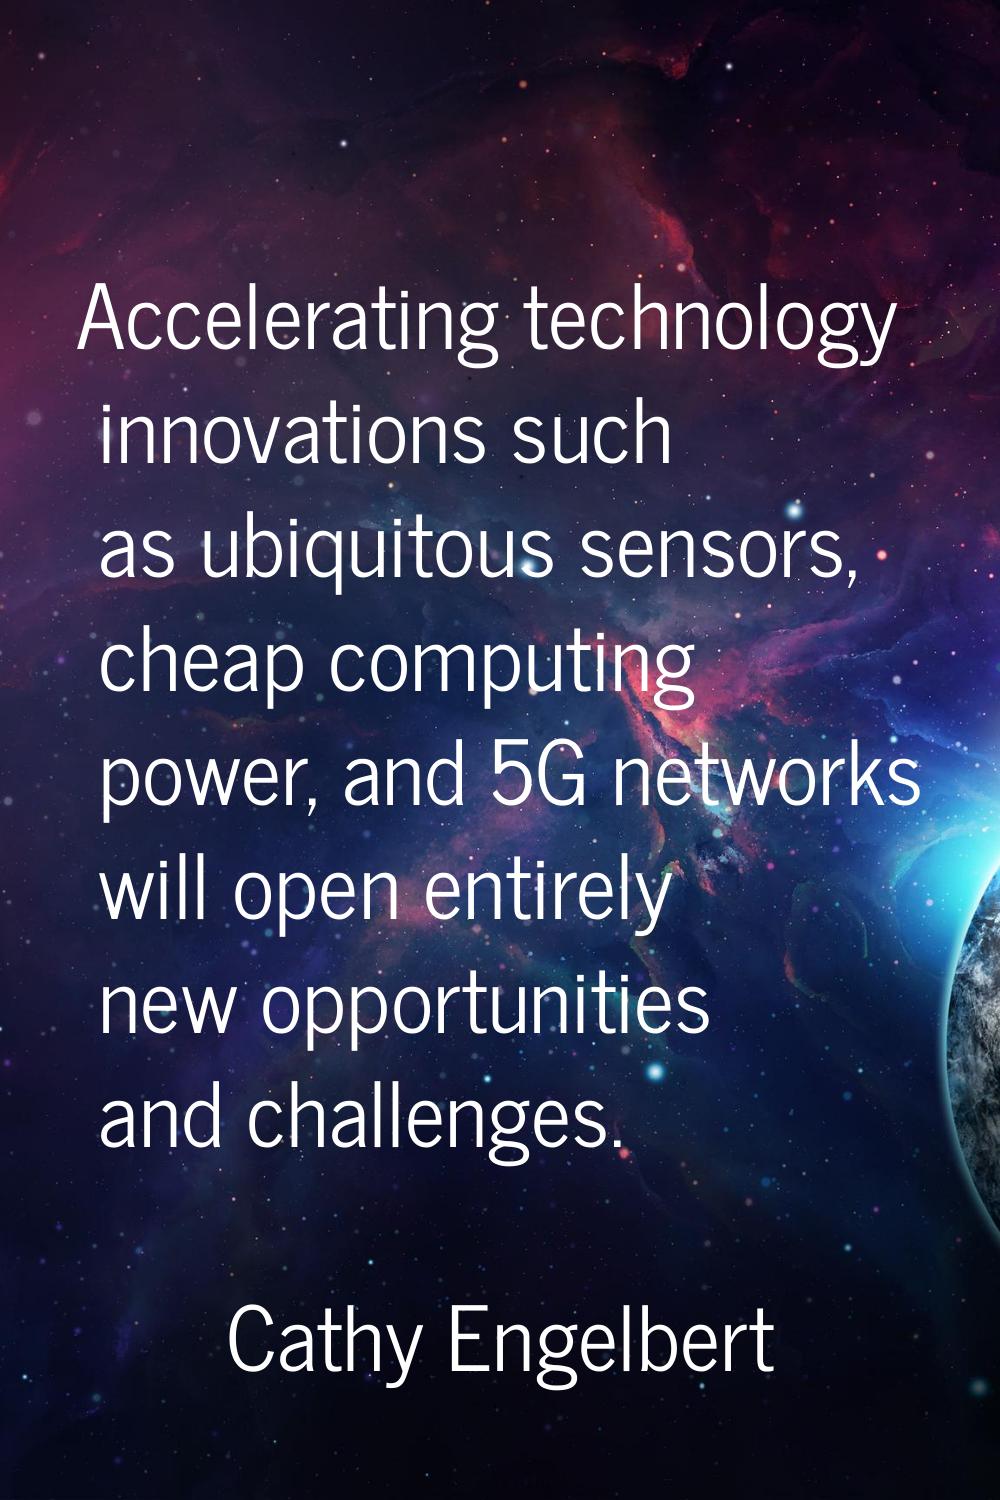 Accelerating technology innovations such as ubiquitous sensors, cheap computing power, and 5G netwo